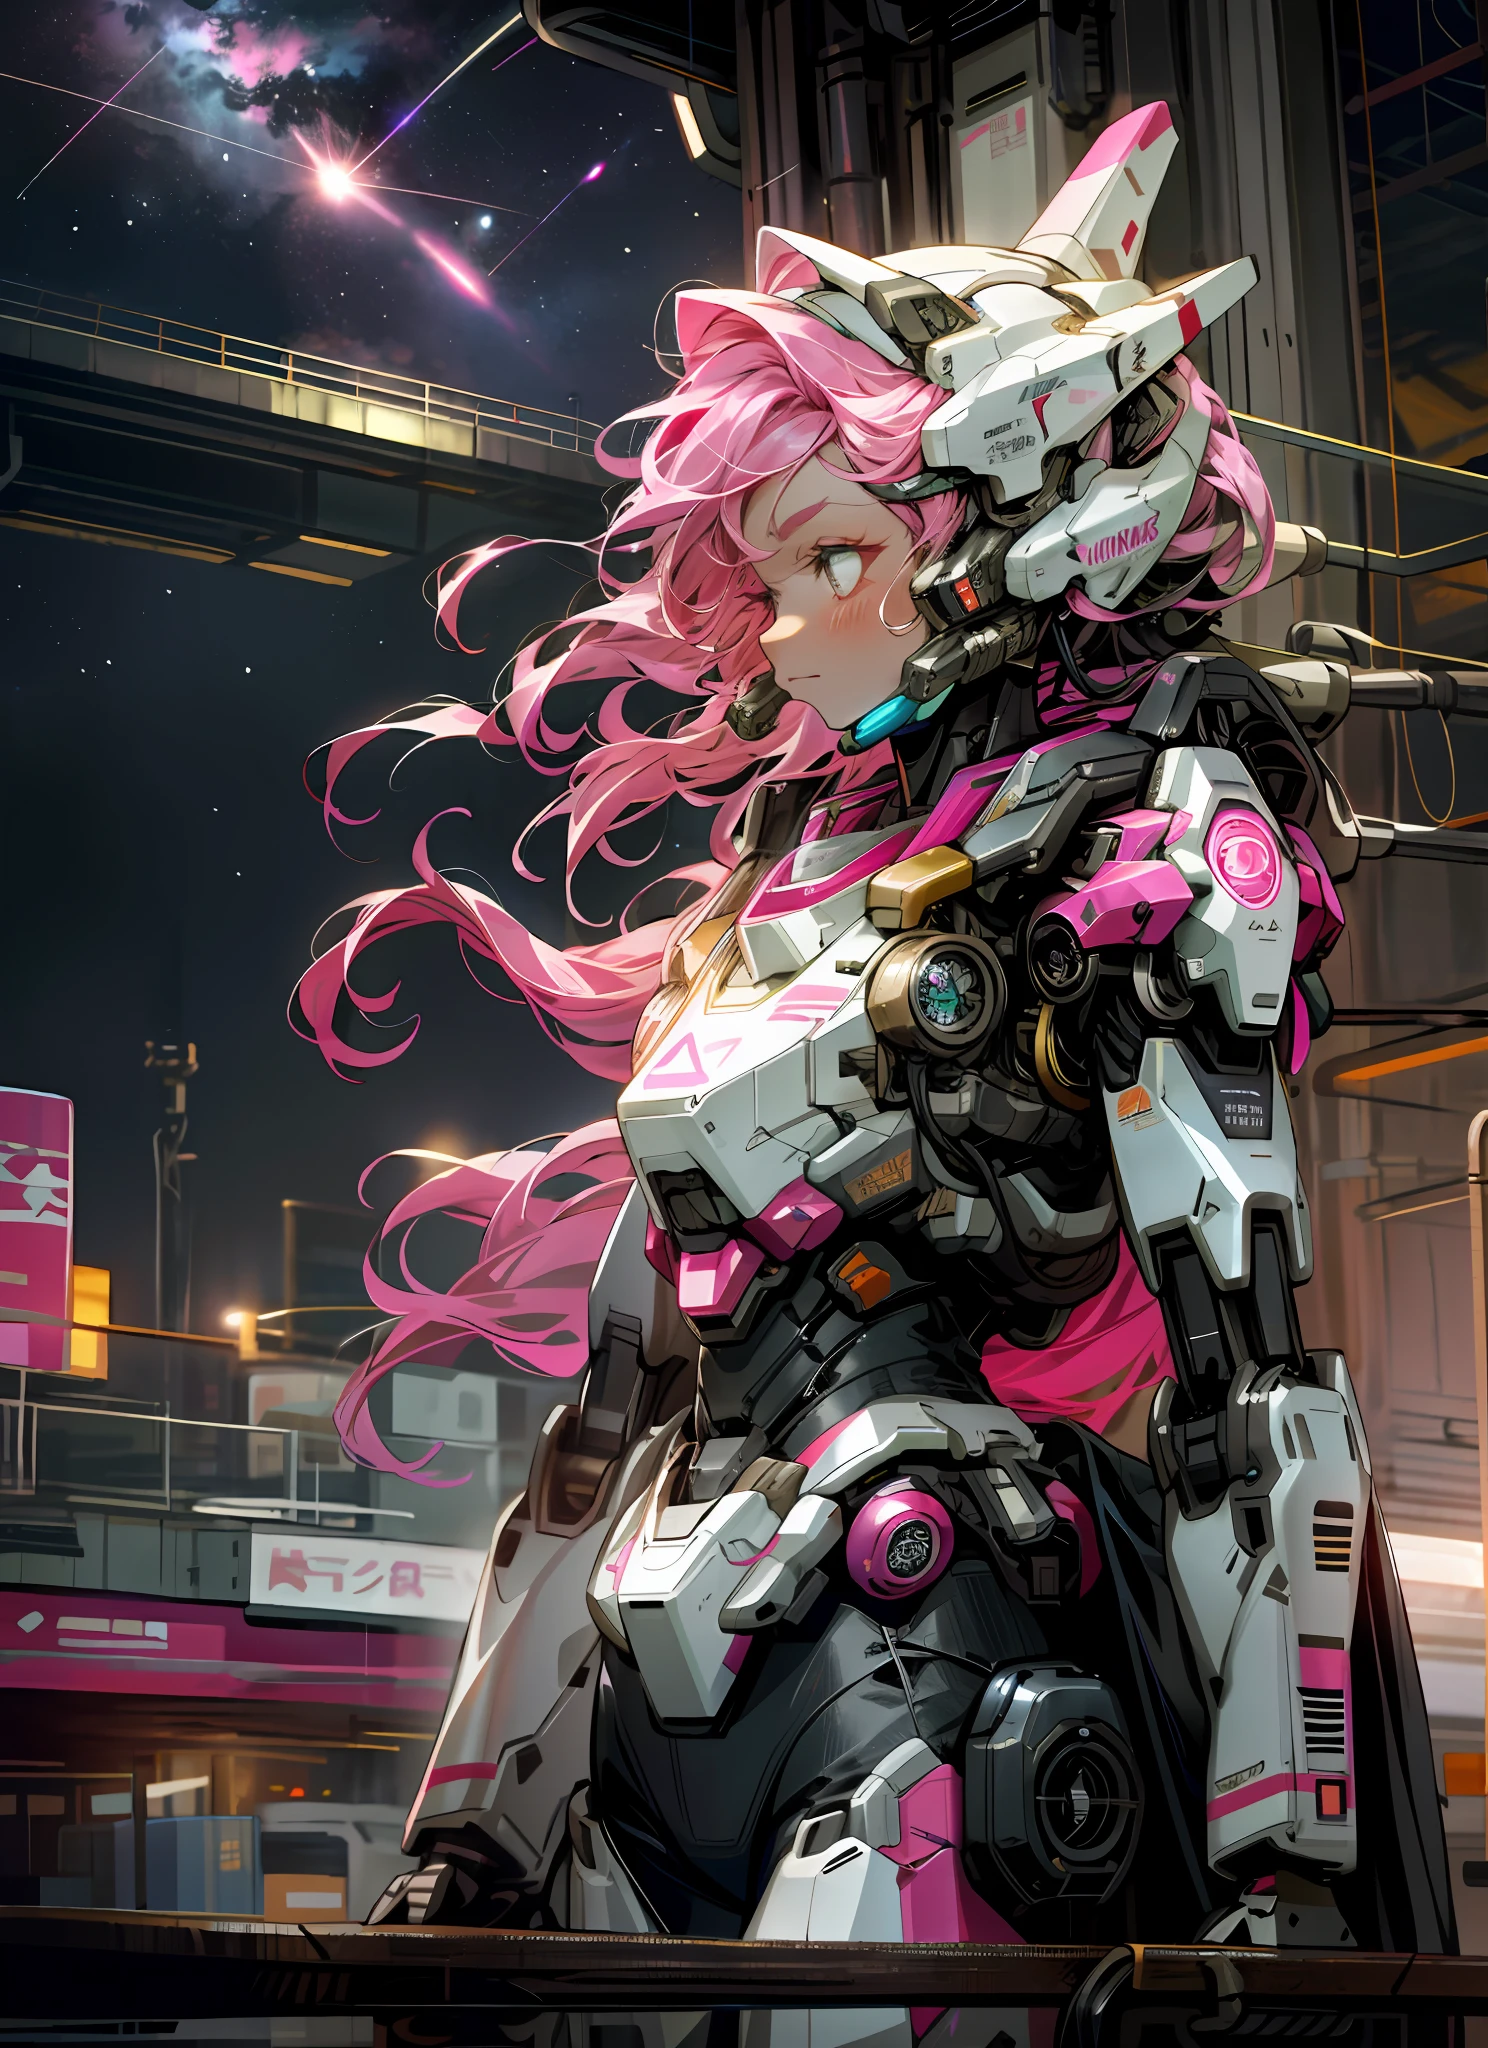 Cosmos, Meteor, Space Station, Glow, Robot, Mecha Girl, Pink Hair, Architecture, glowing_eyes, Mecha, Science Fiction, City, Reality, Mecha